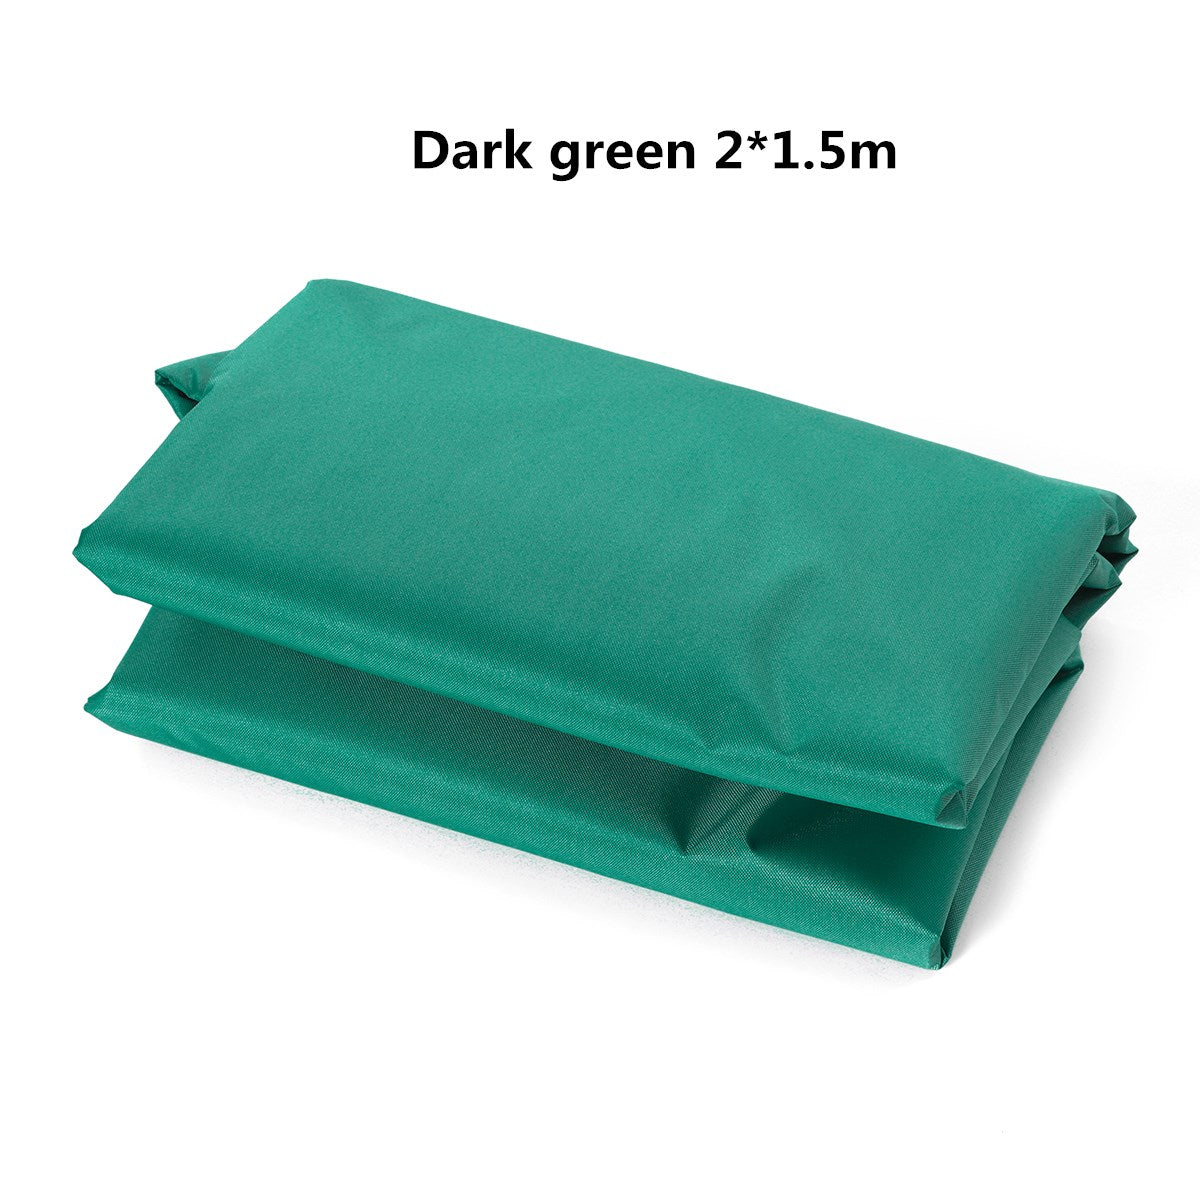 Sea Green Boat Outdoor Garden Patio Awning Cover Canopy Sun Shade Shelter Waterproof